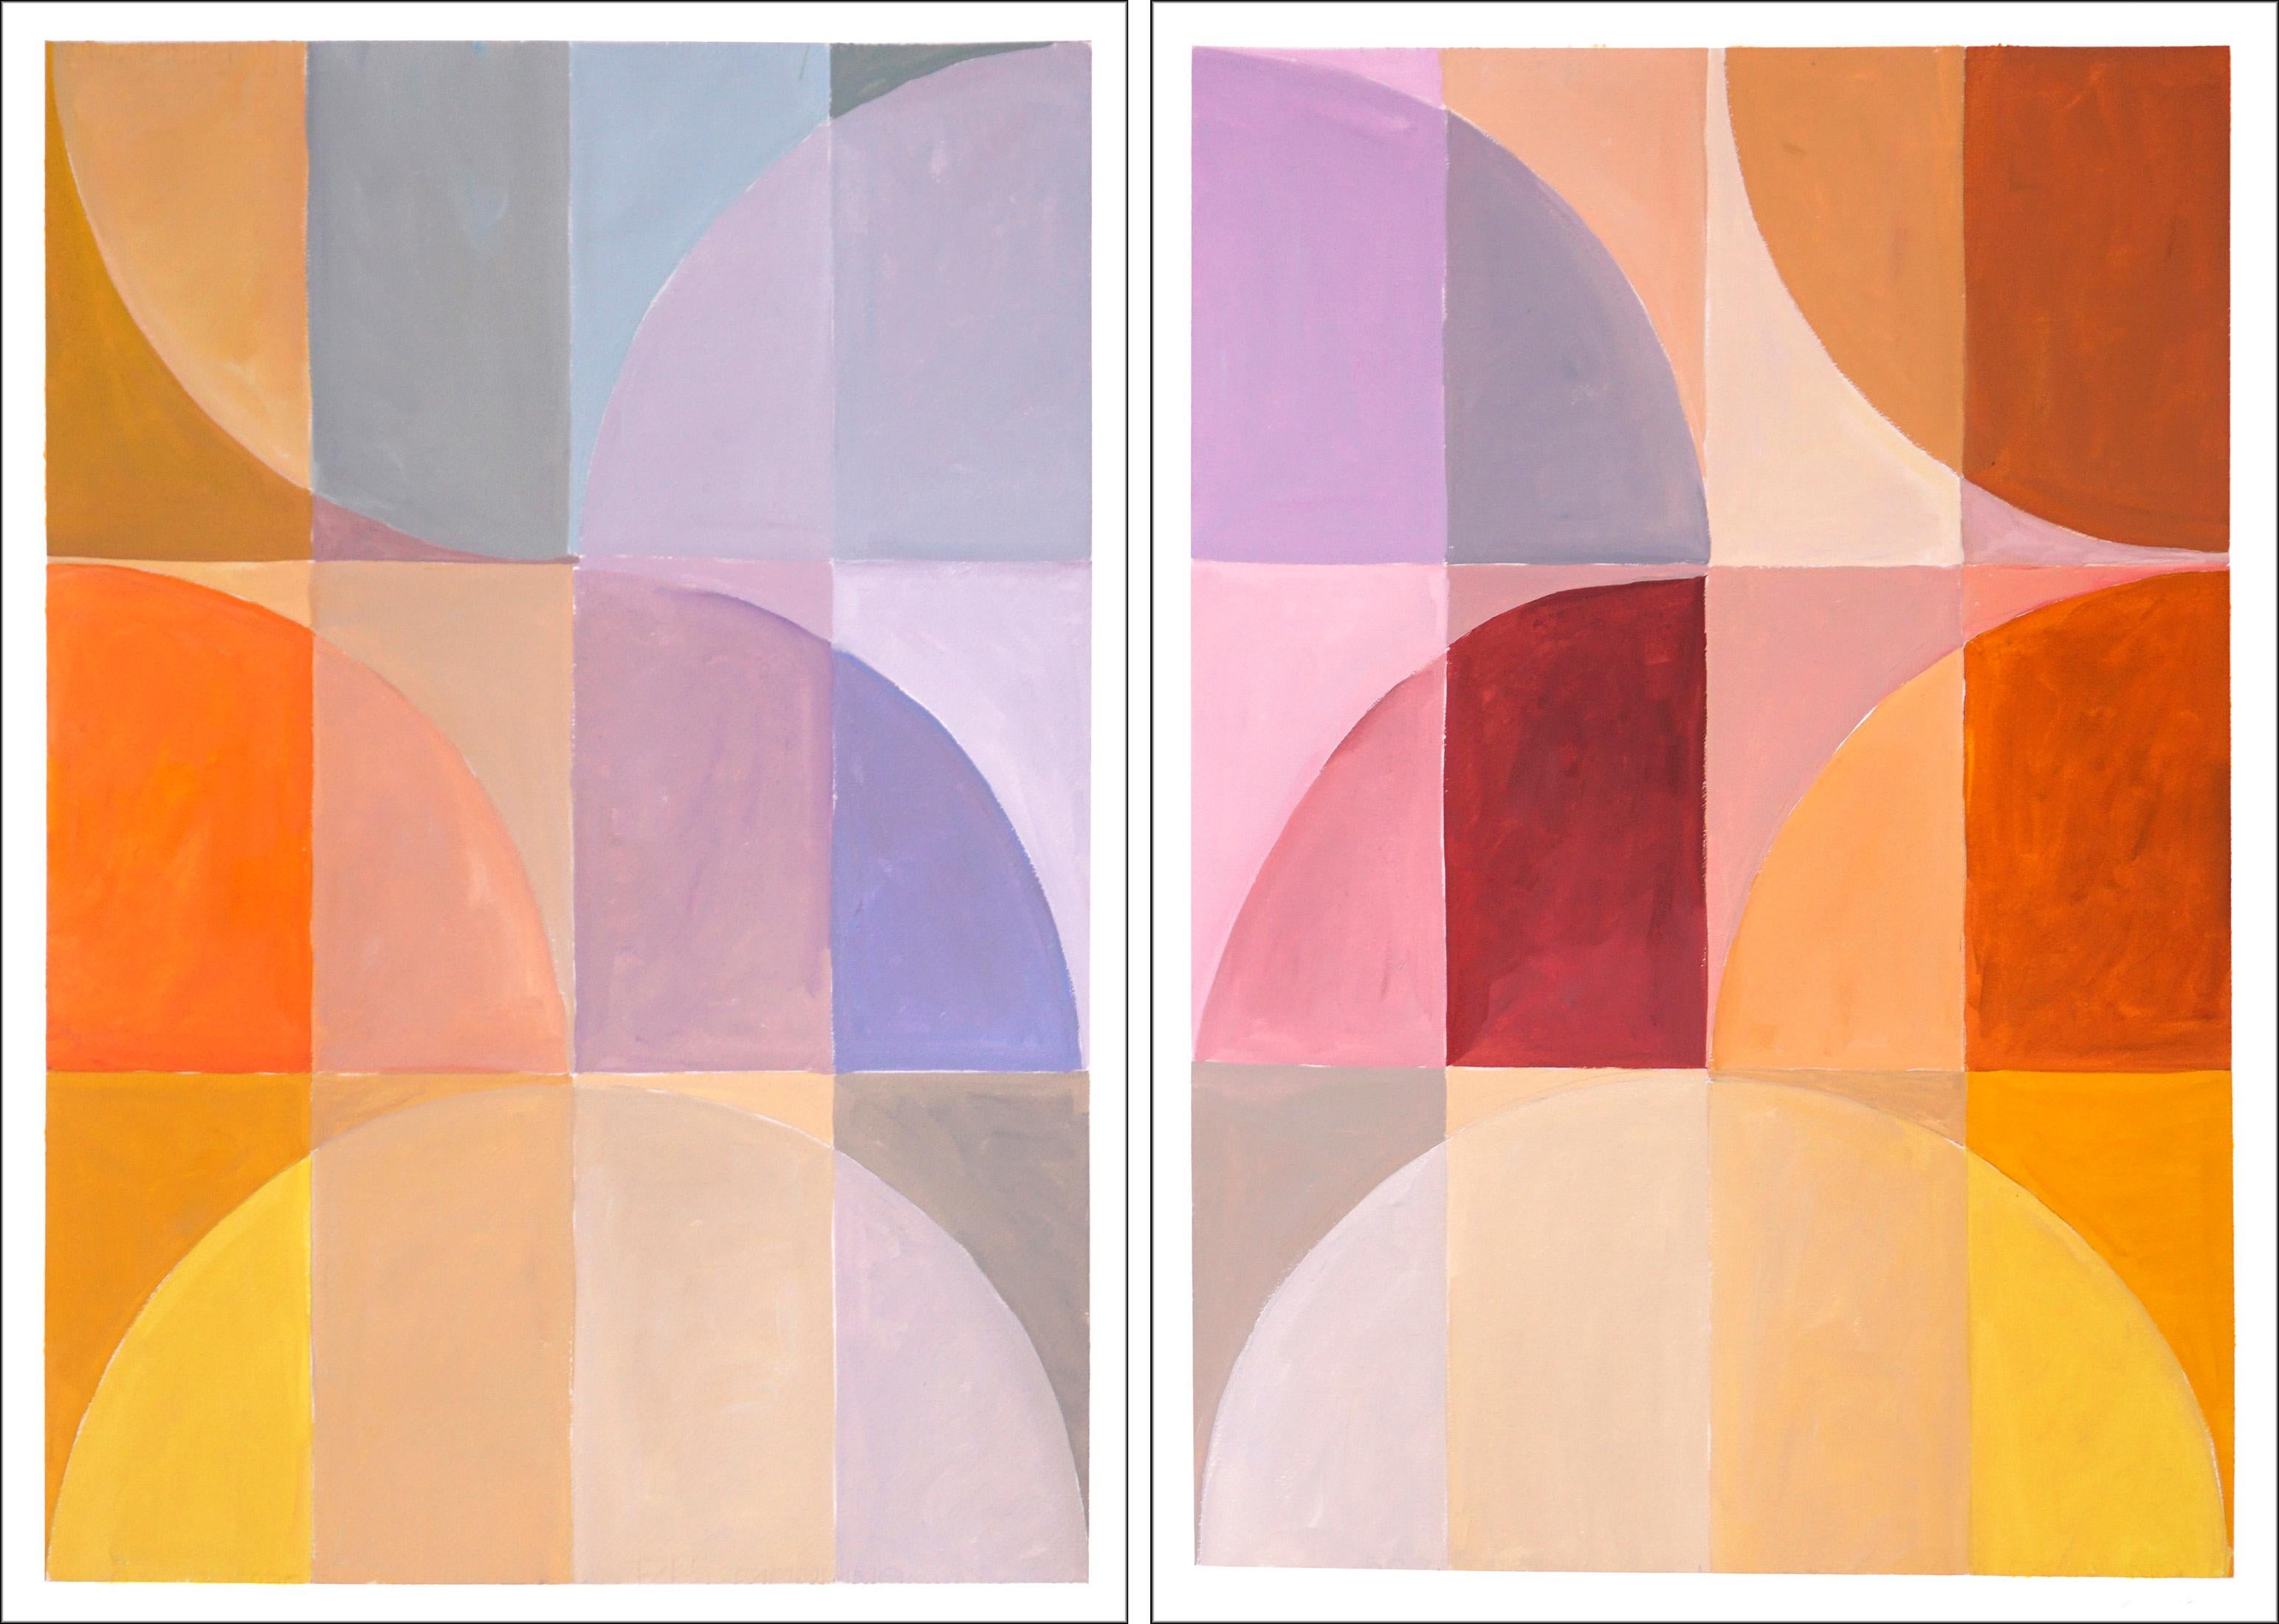 Natalia Roman Landscape Painting - Stained Glass Study in Pastel Hues, Bauhaus Pattern Diptych, Warm Yellow, Pink